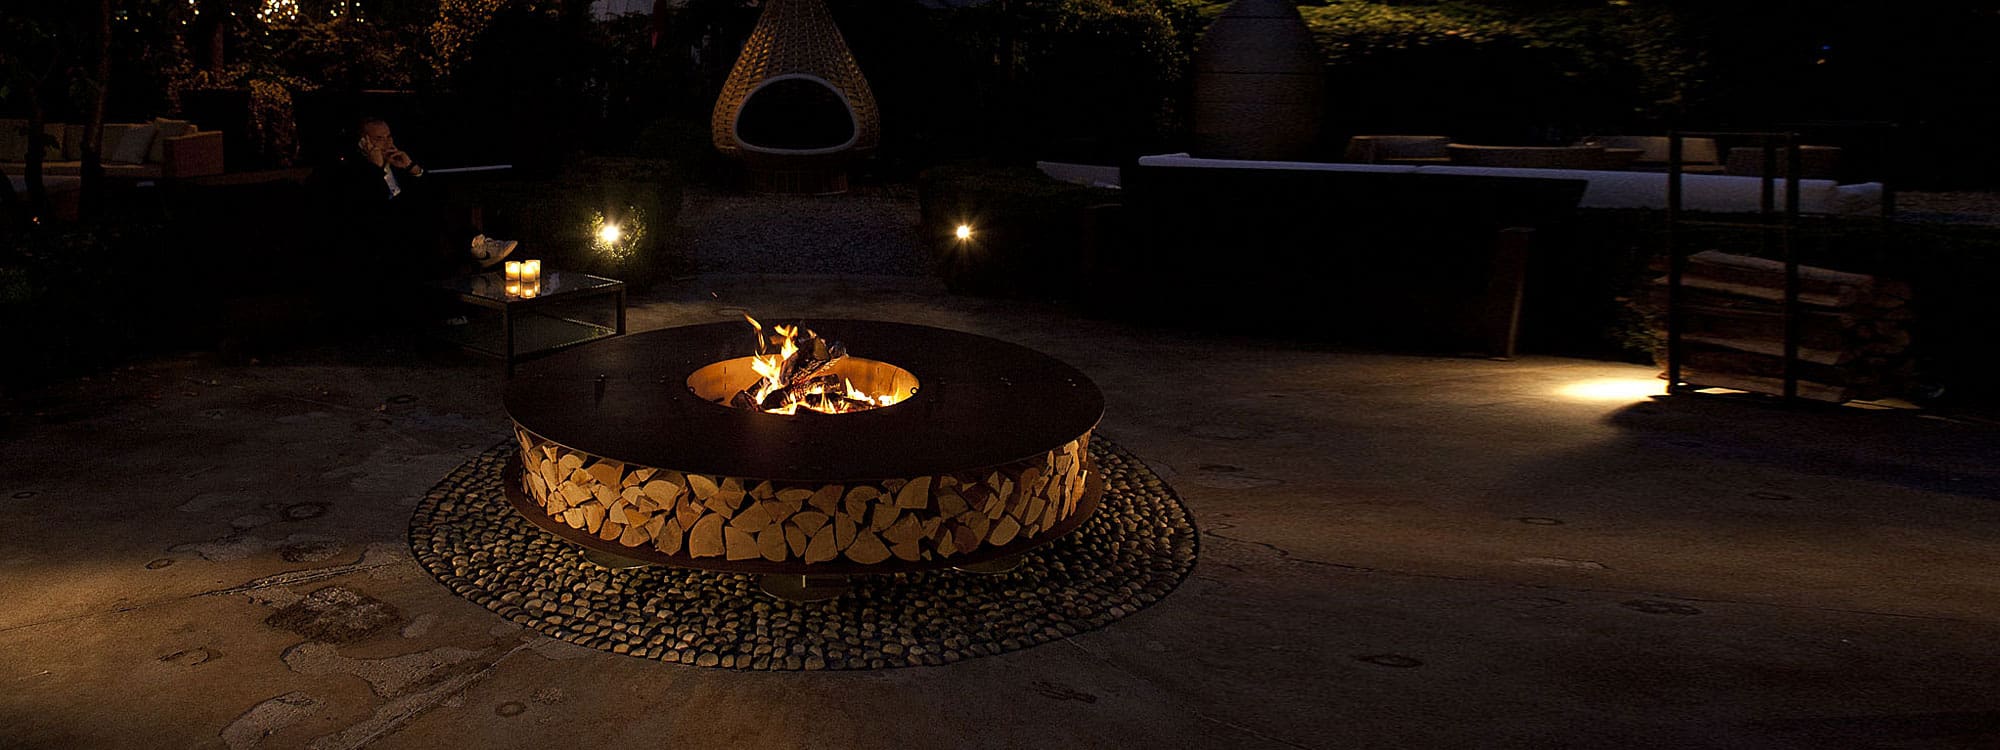 Night time shot of the dancing flames within Zero fire pit by AK47 fire pits, Italy.